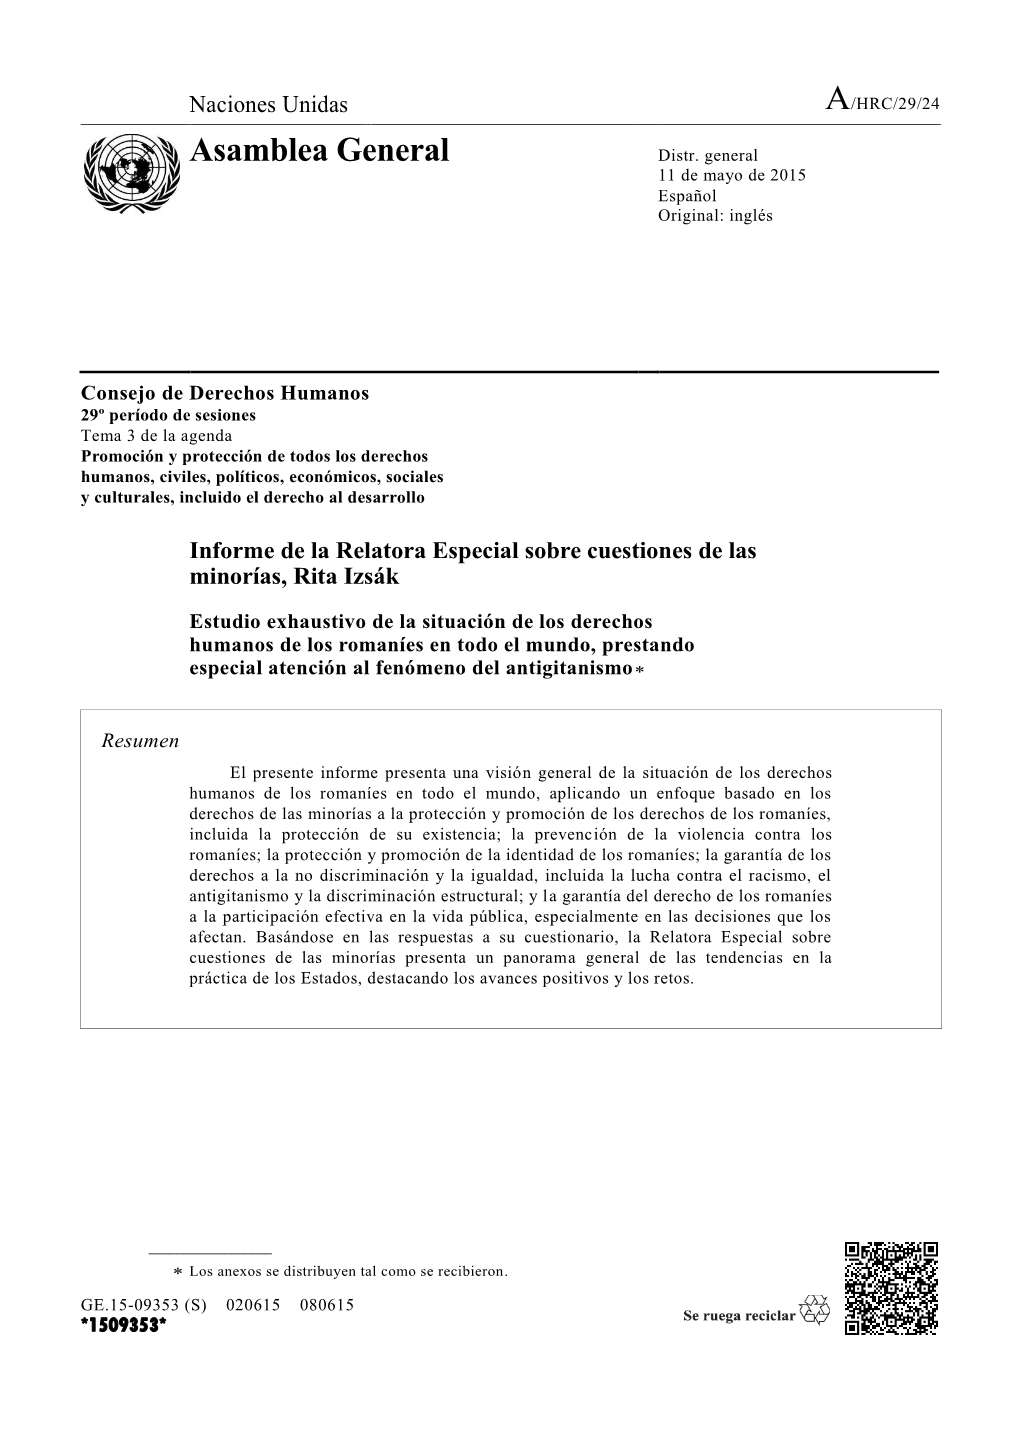 Comprehensive Study of the Special Rapporteur on Minority Issues On